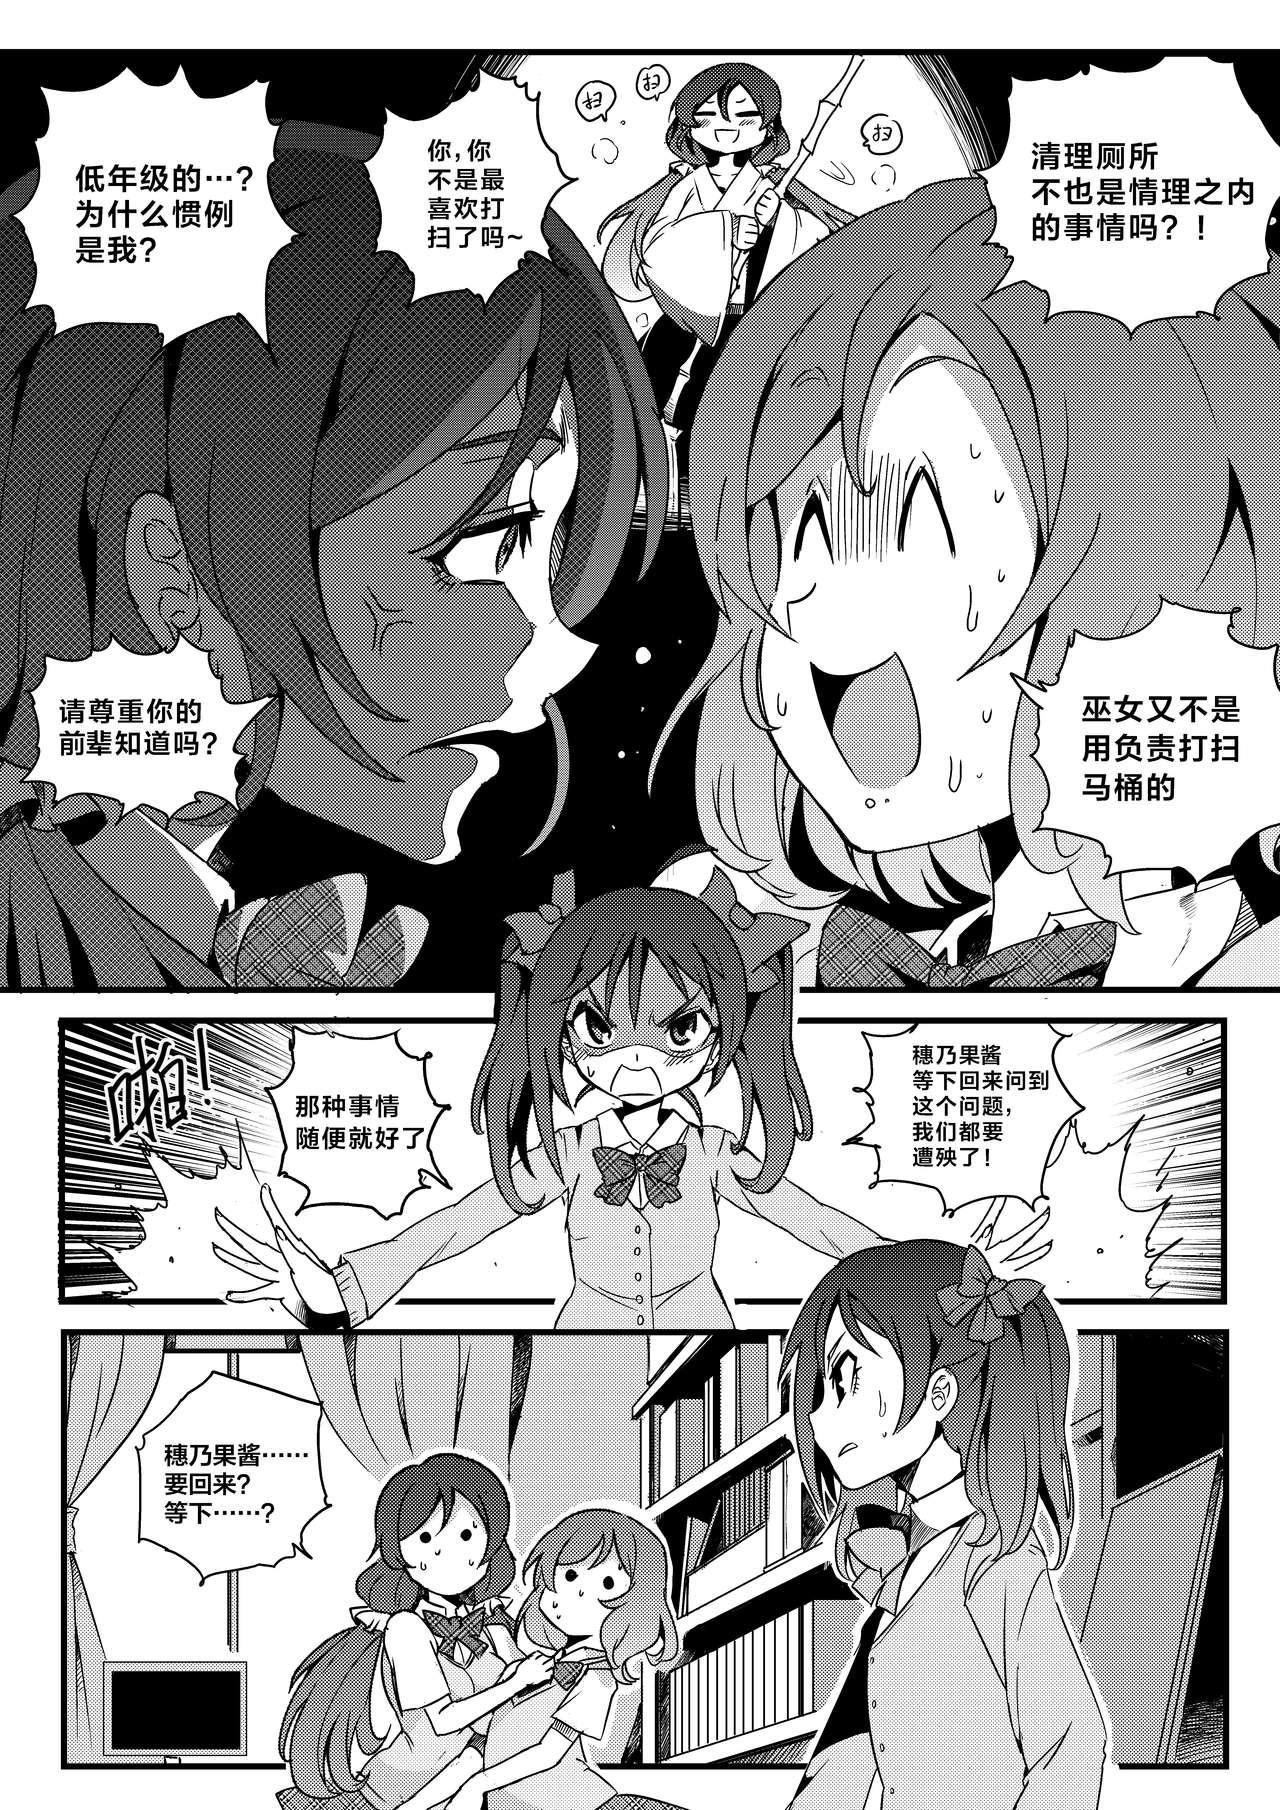 Deep 果胆卯威 - Kantai collection The idolmaster Love live Bedroom - Page 4